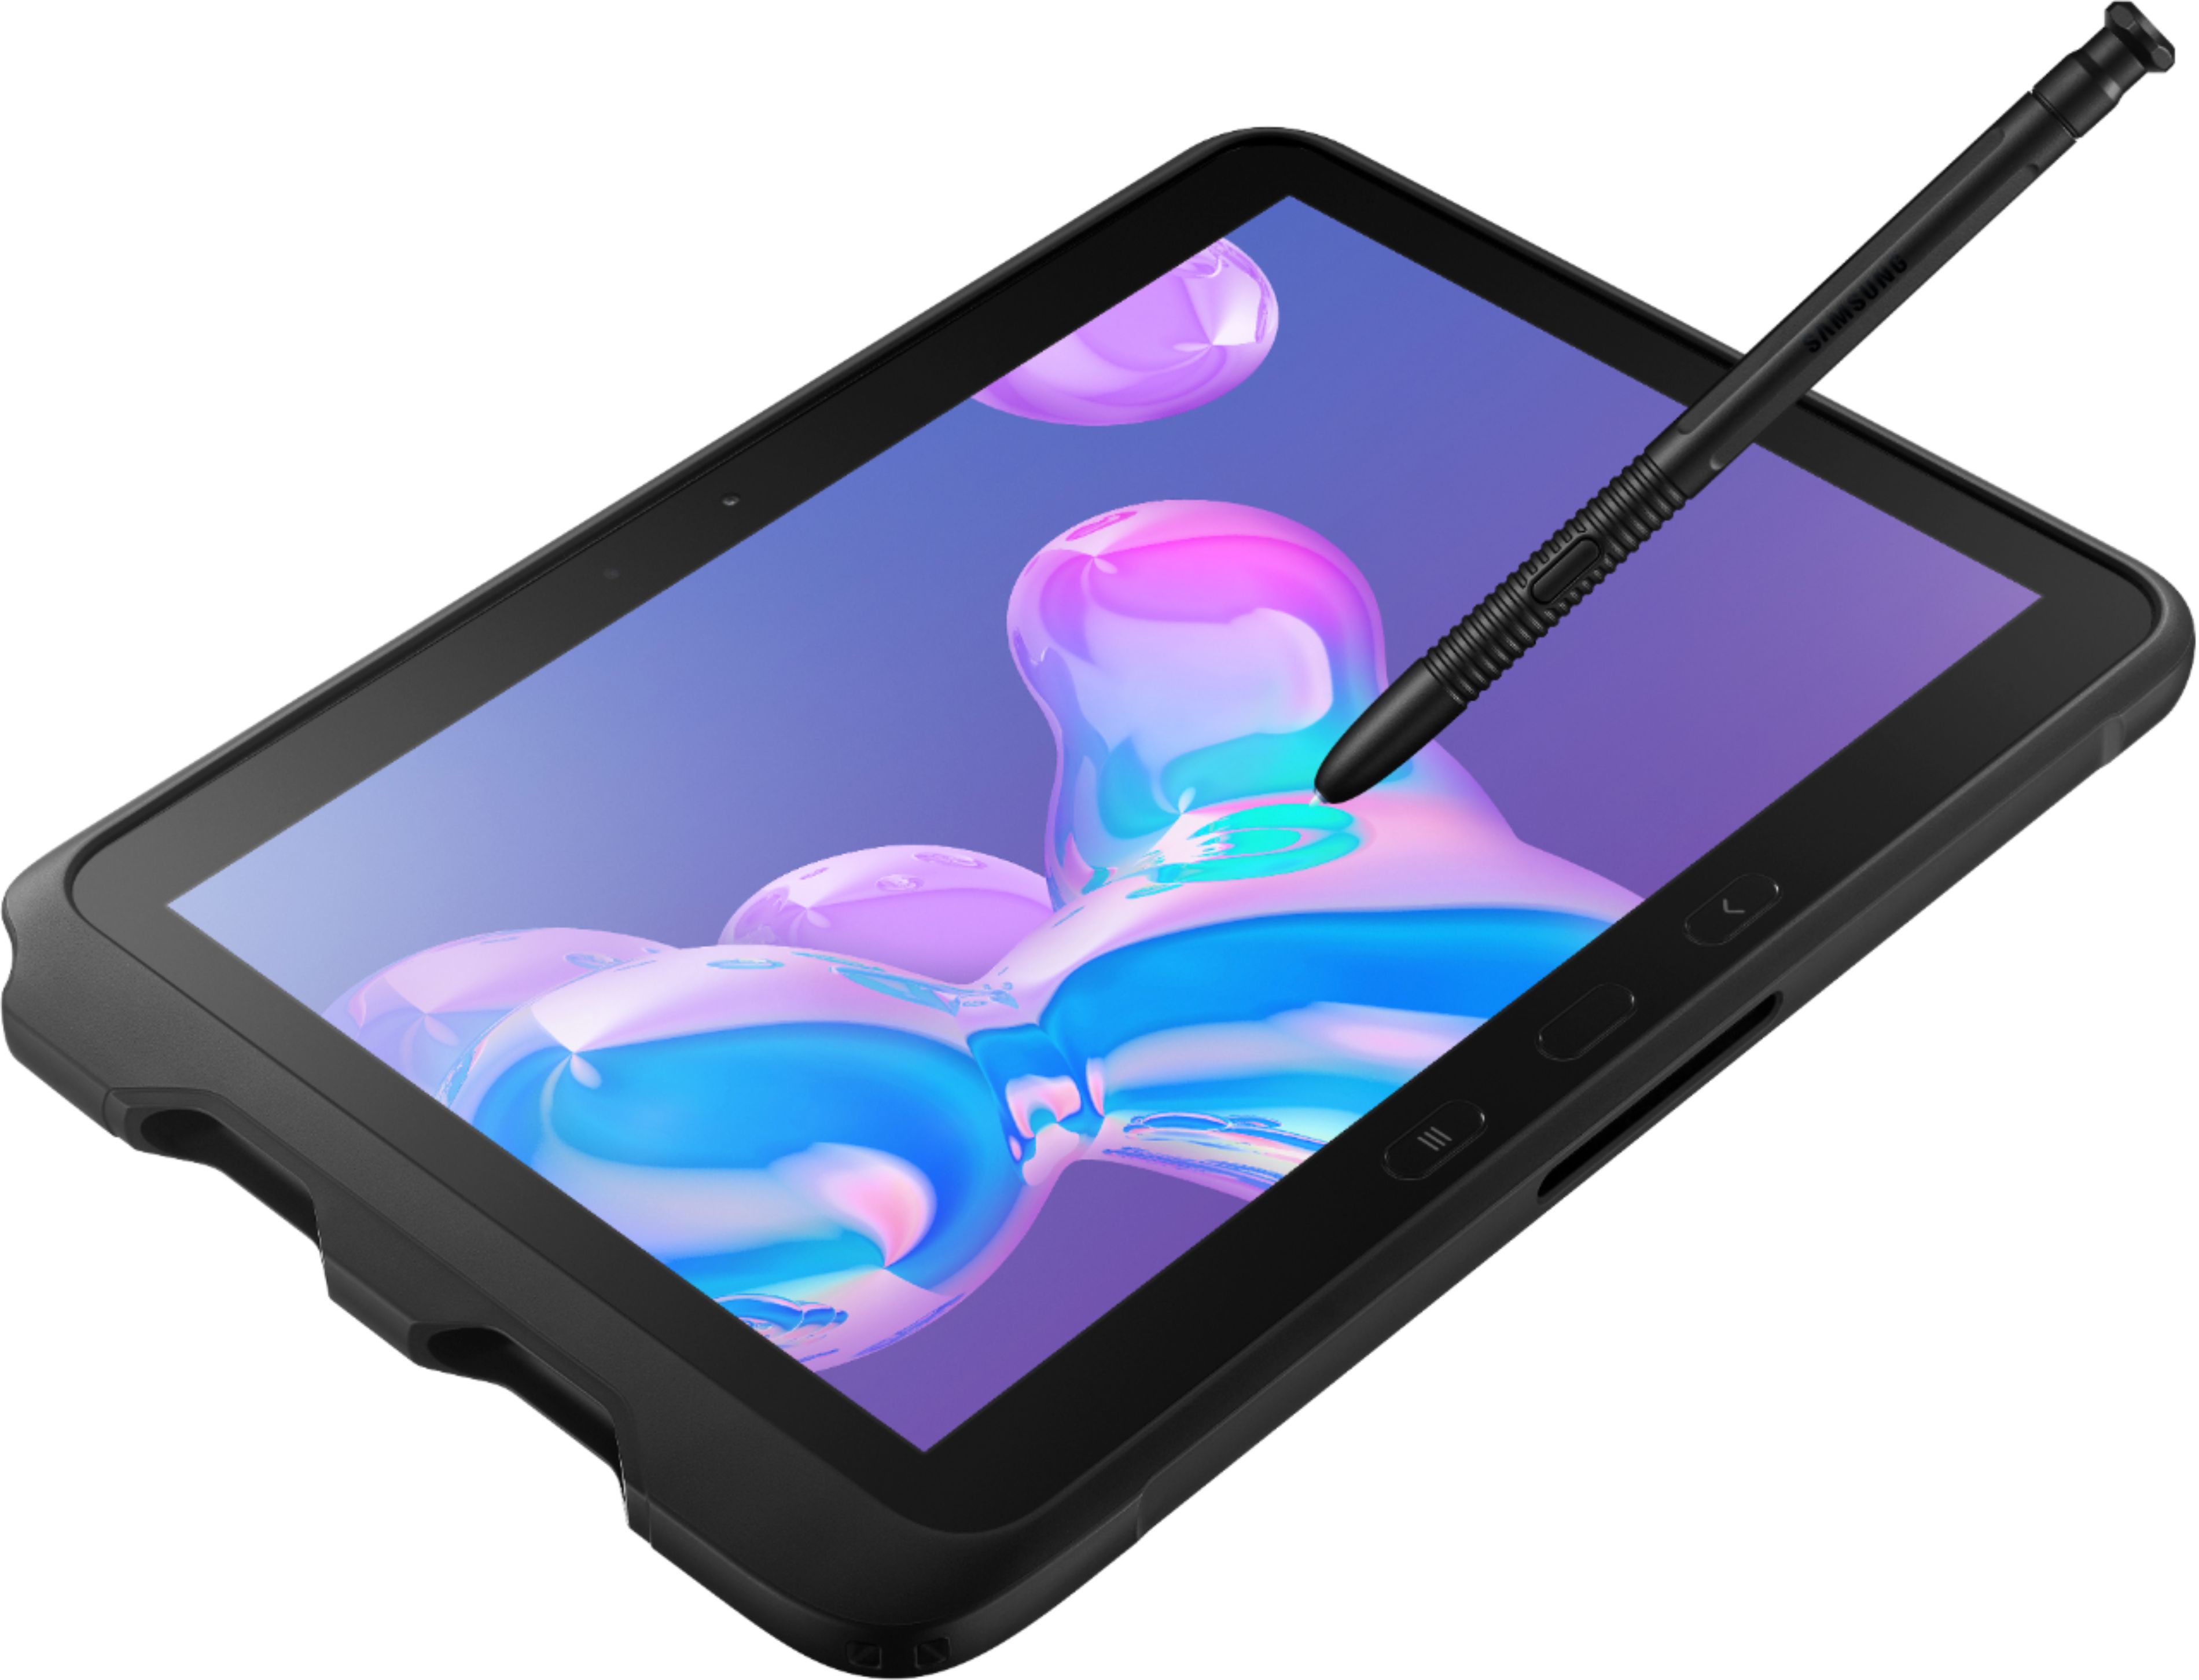 Samsung Galaxy Tab Active 4 Pro - tablet - Android - 64 GB - 10.1 - 3G,  4G, 5G